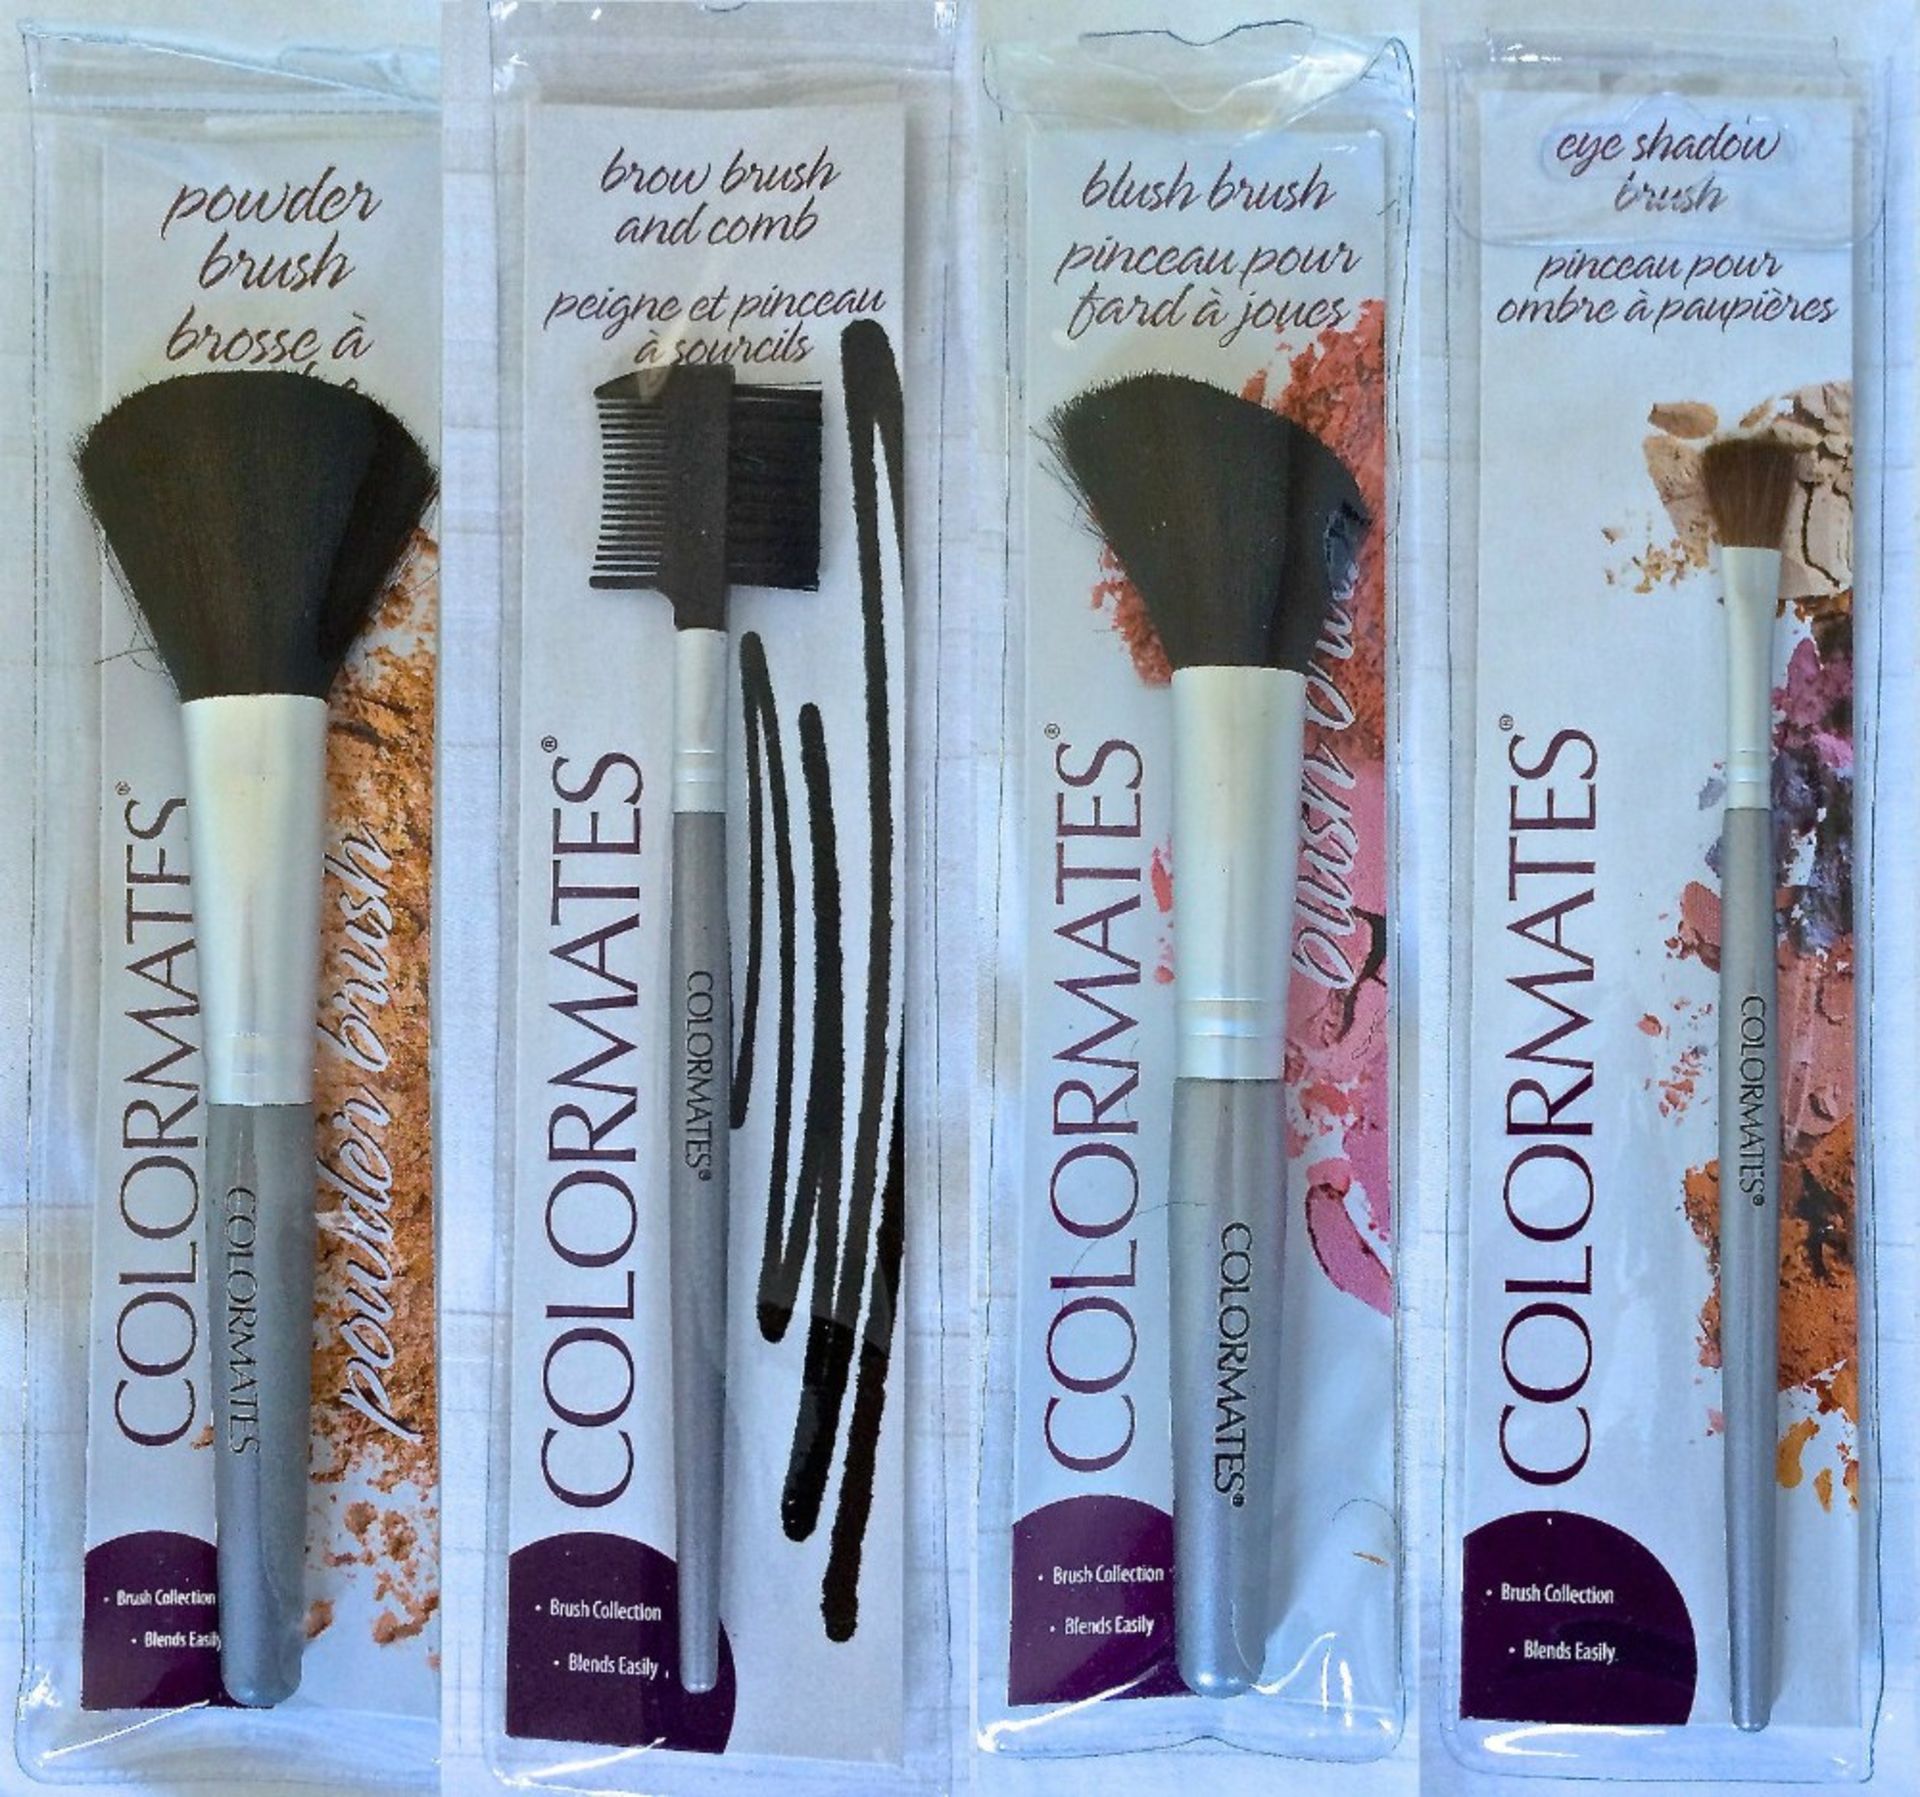 1000 x Colormates Brushes – 4 Types – Blusher / Powder / Brow / Eyeshadow – Individually Packed – NO